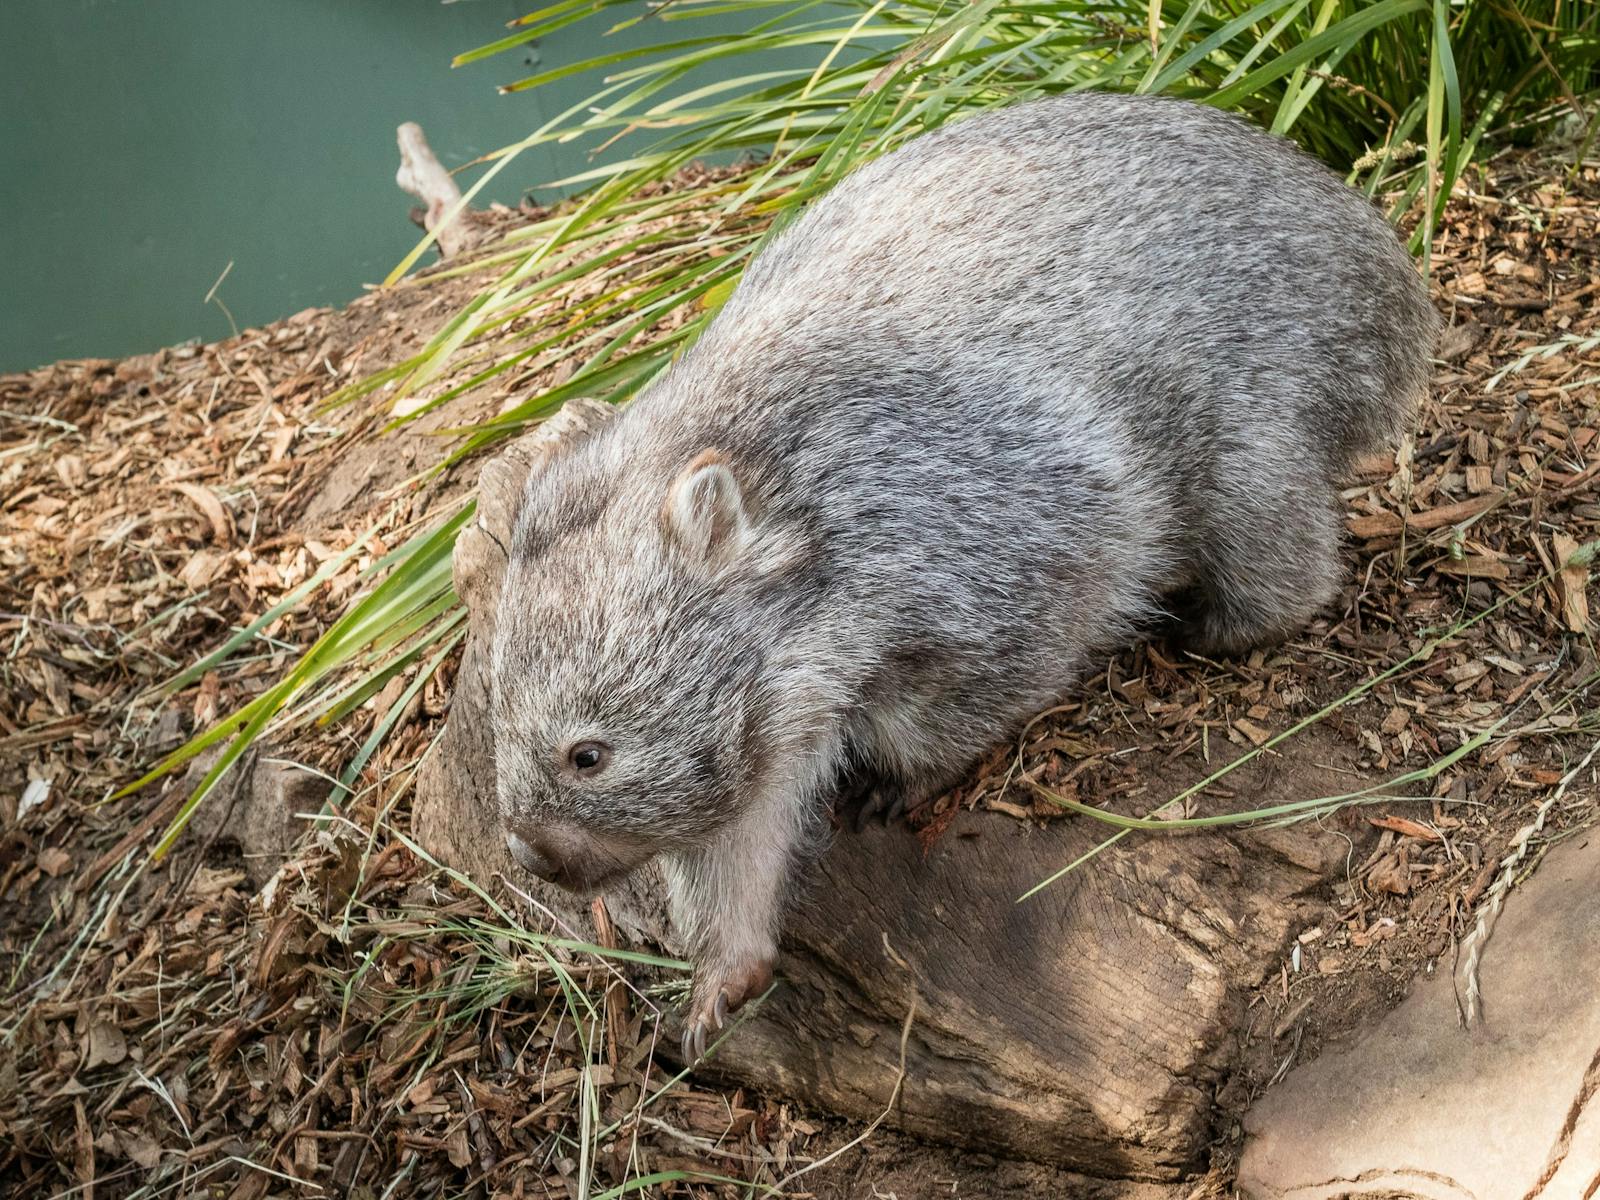 Wombat stepping over a rock ledge.